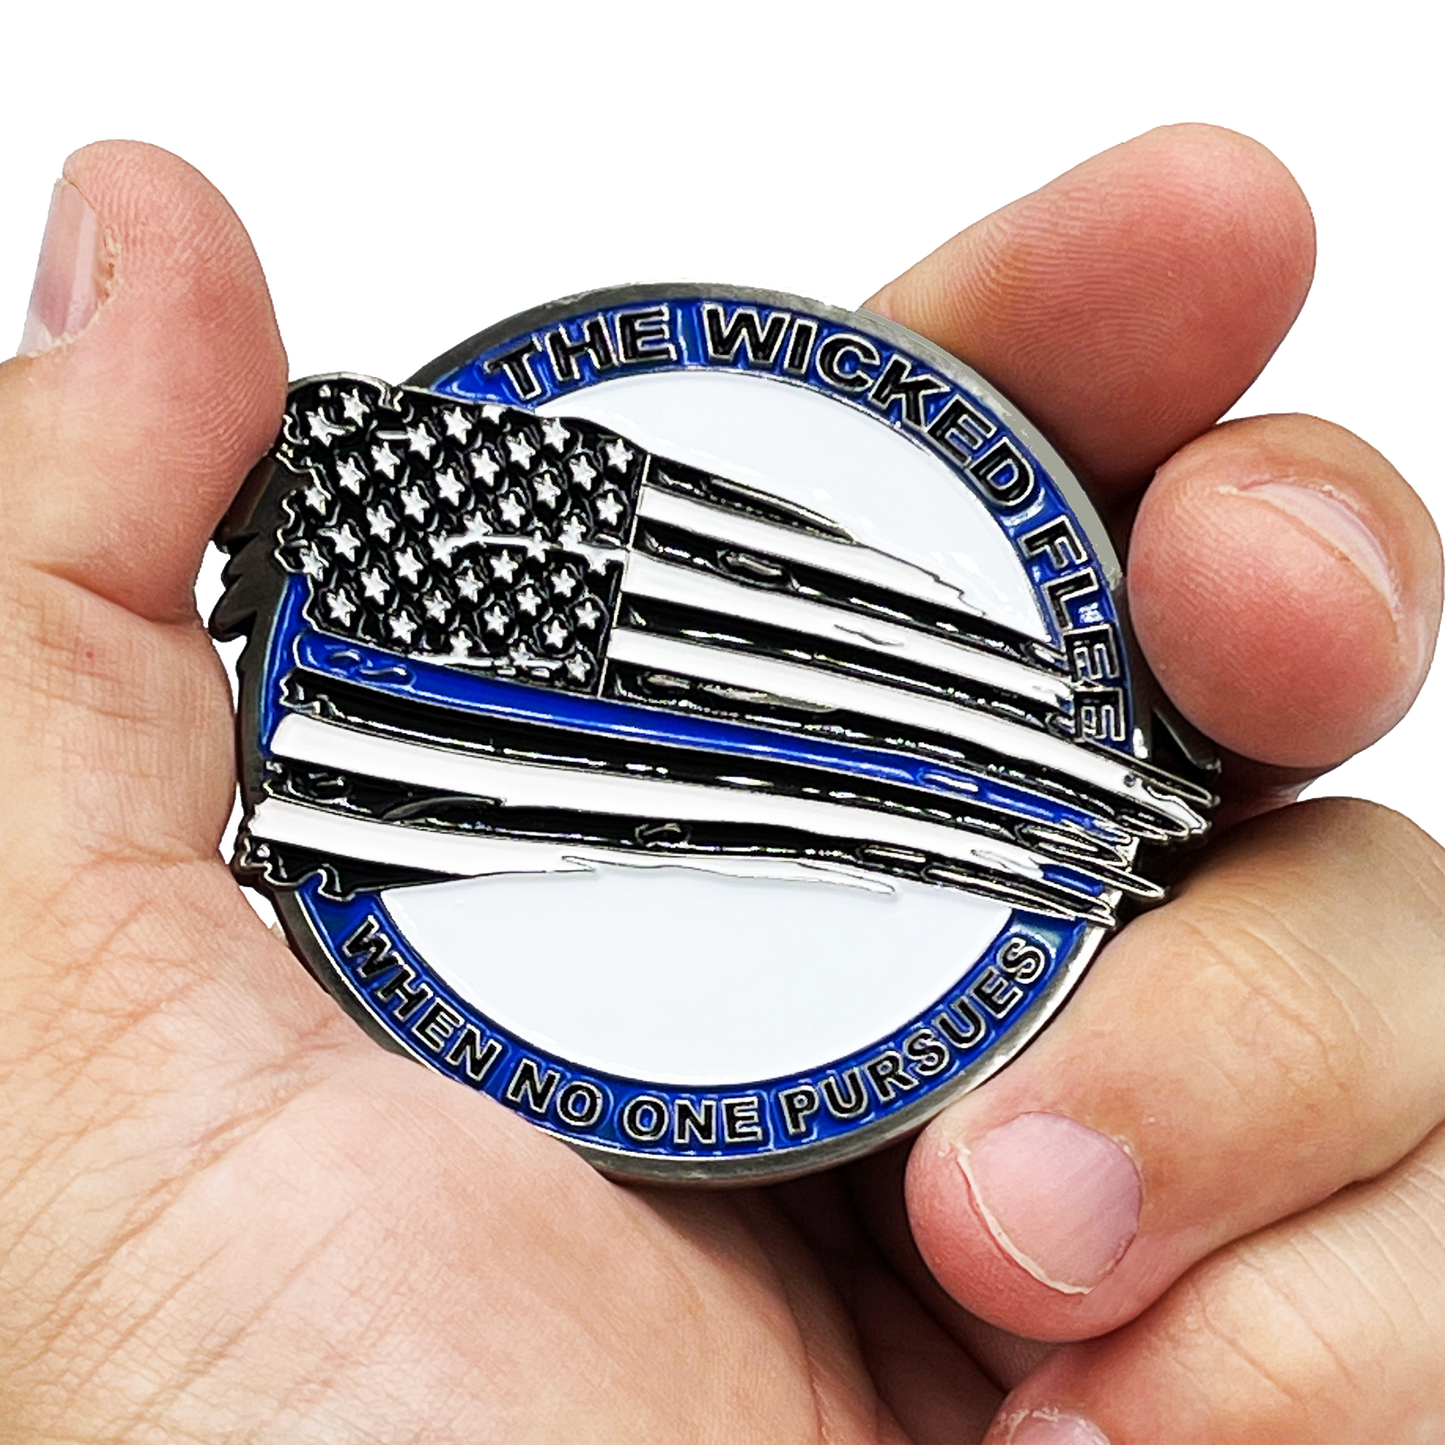 BL5-015 Thin Blue Line Flag and Eagle Police Challenge Coin NYPD CHP LAPD Chicago NOPD Police Officer CBP